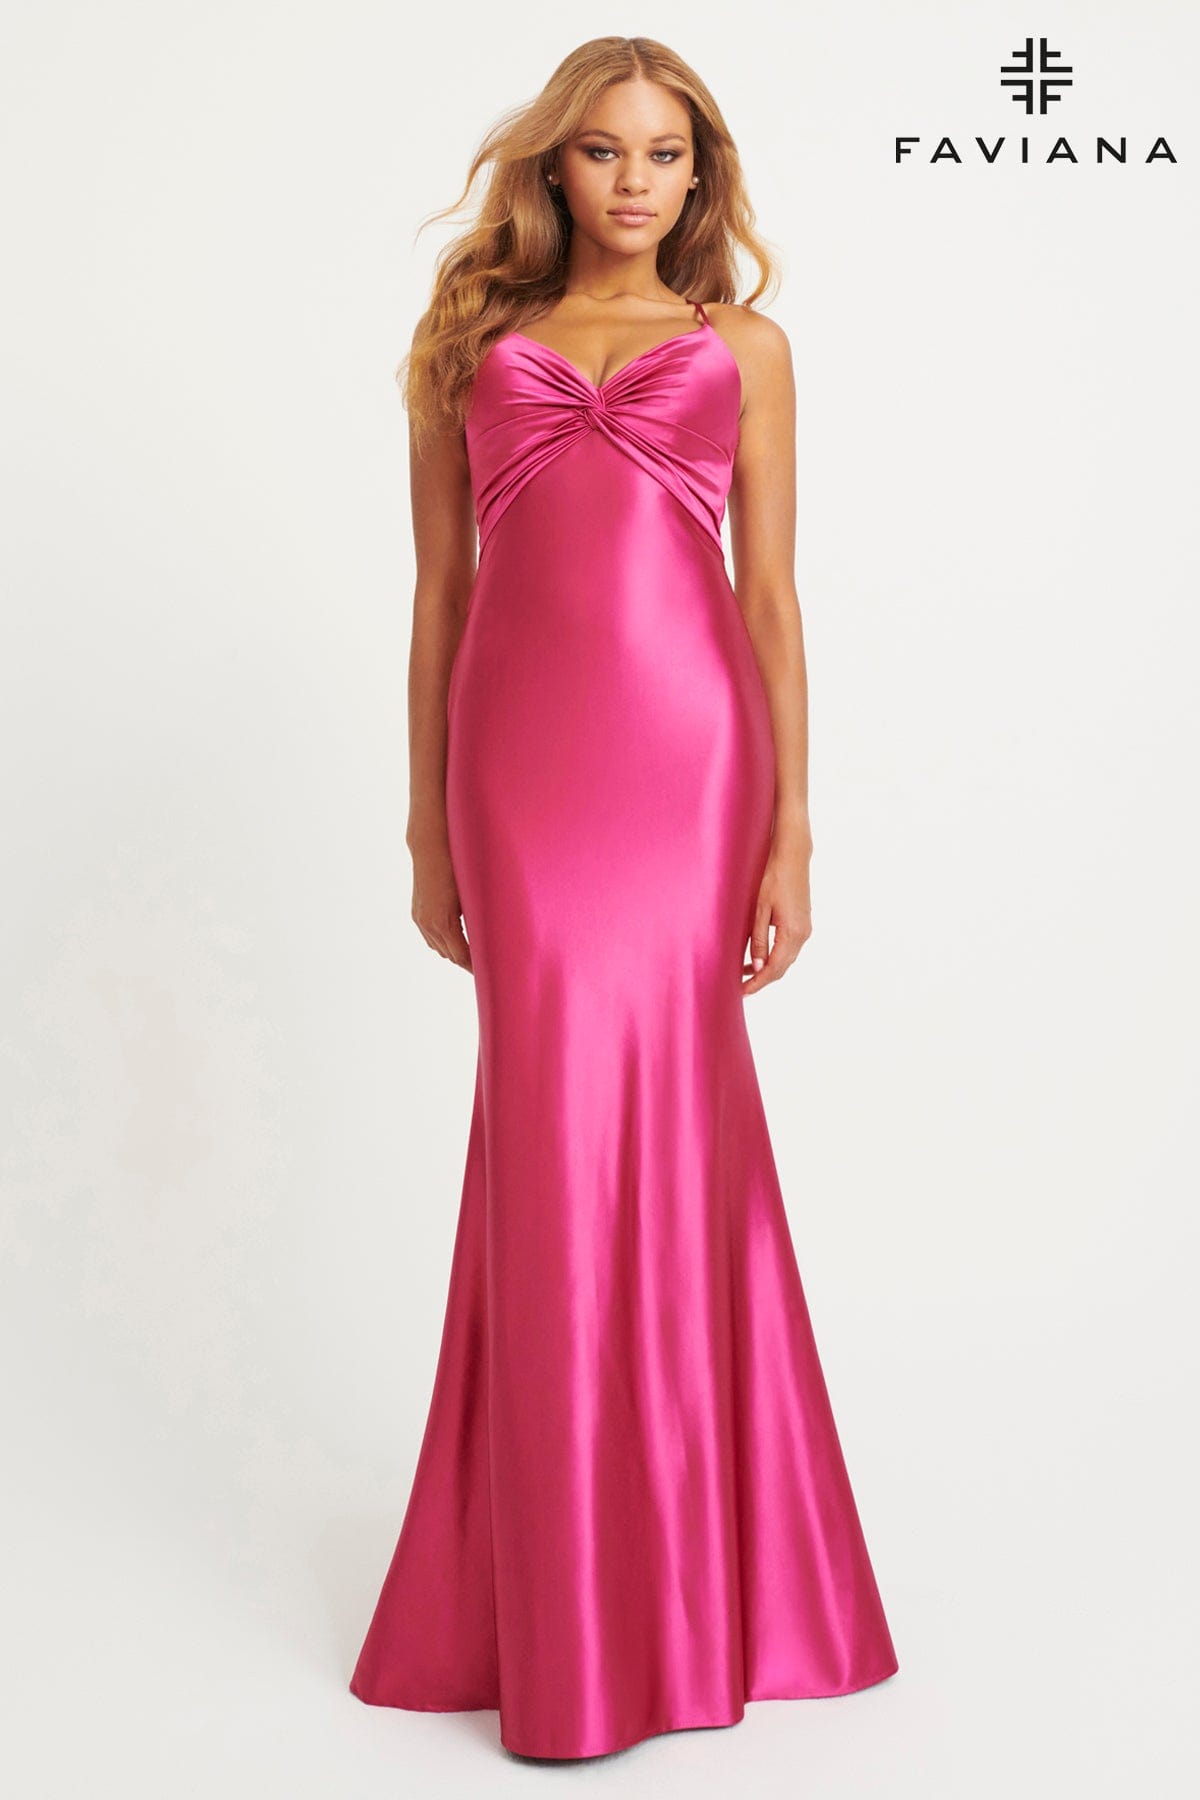 Sleek Satin Long Dress For Prom With Knot Bustier | 11034